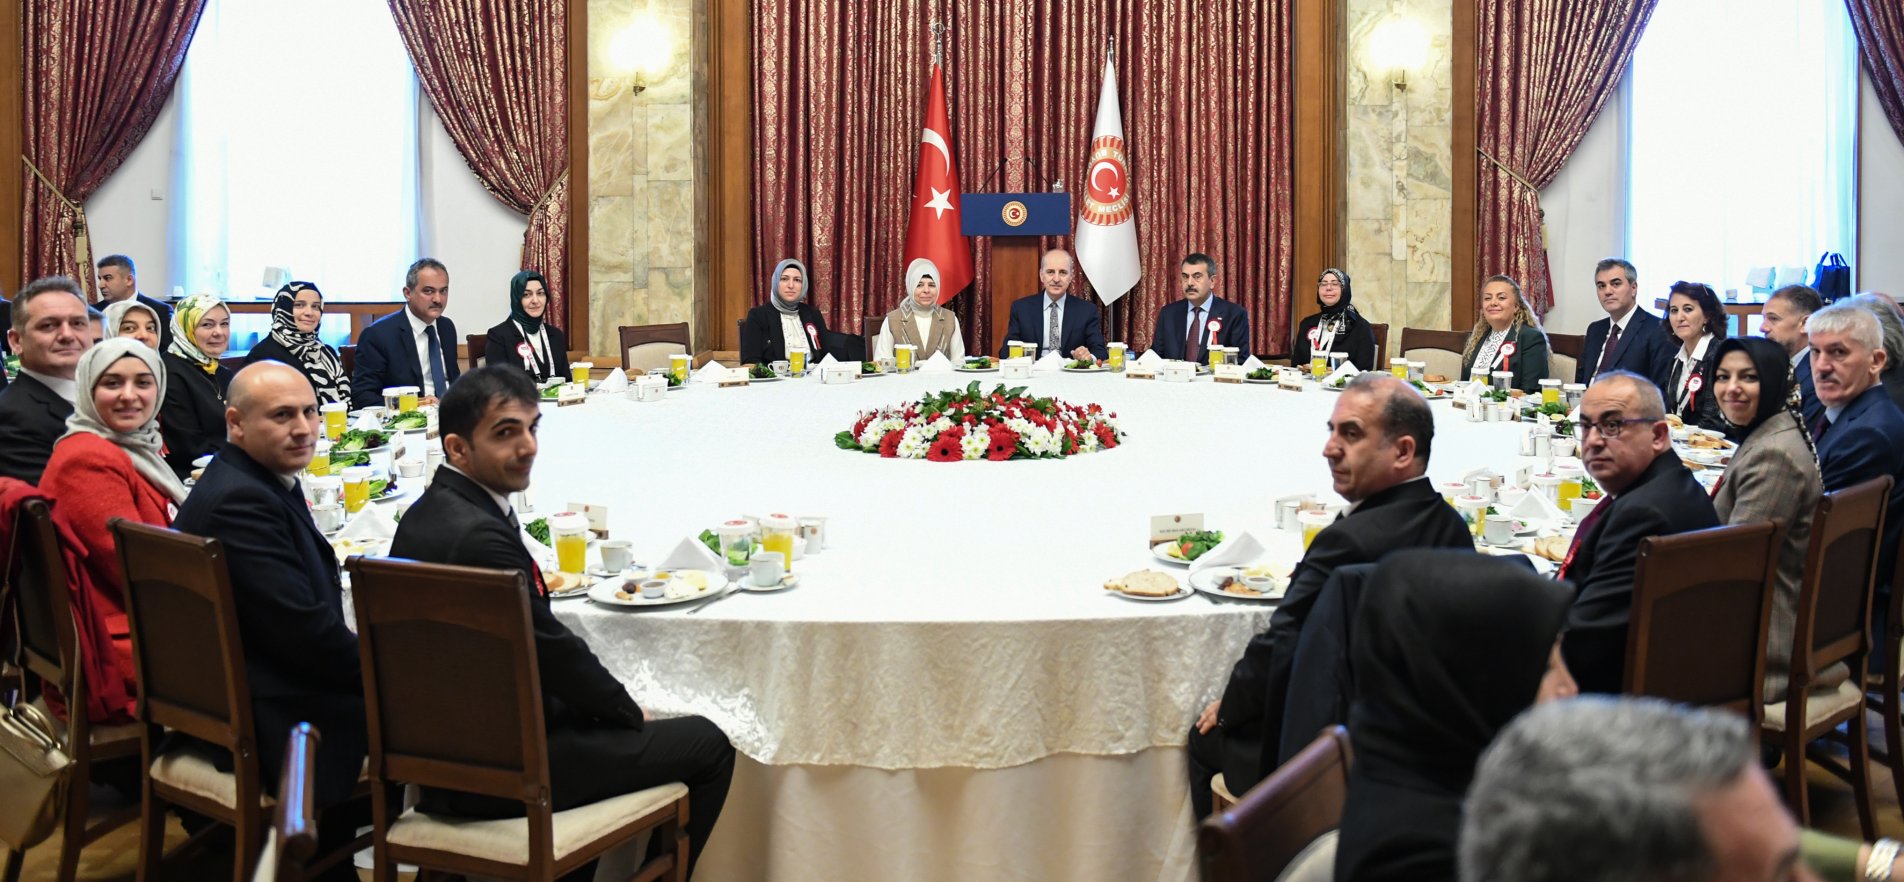 SPEAKER OF THE GNAT KURTULMUŞ AND MINISTER TEKİN MEET WITH TEACHERS COMING FROM 81 PROVINCES IN THE GNAT